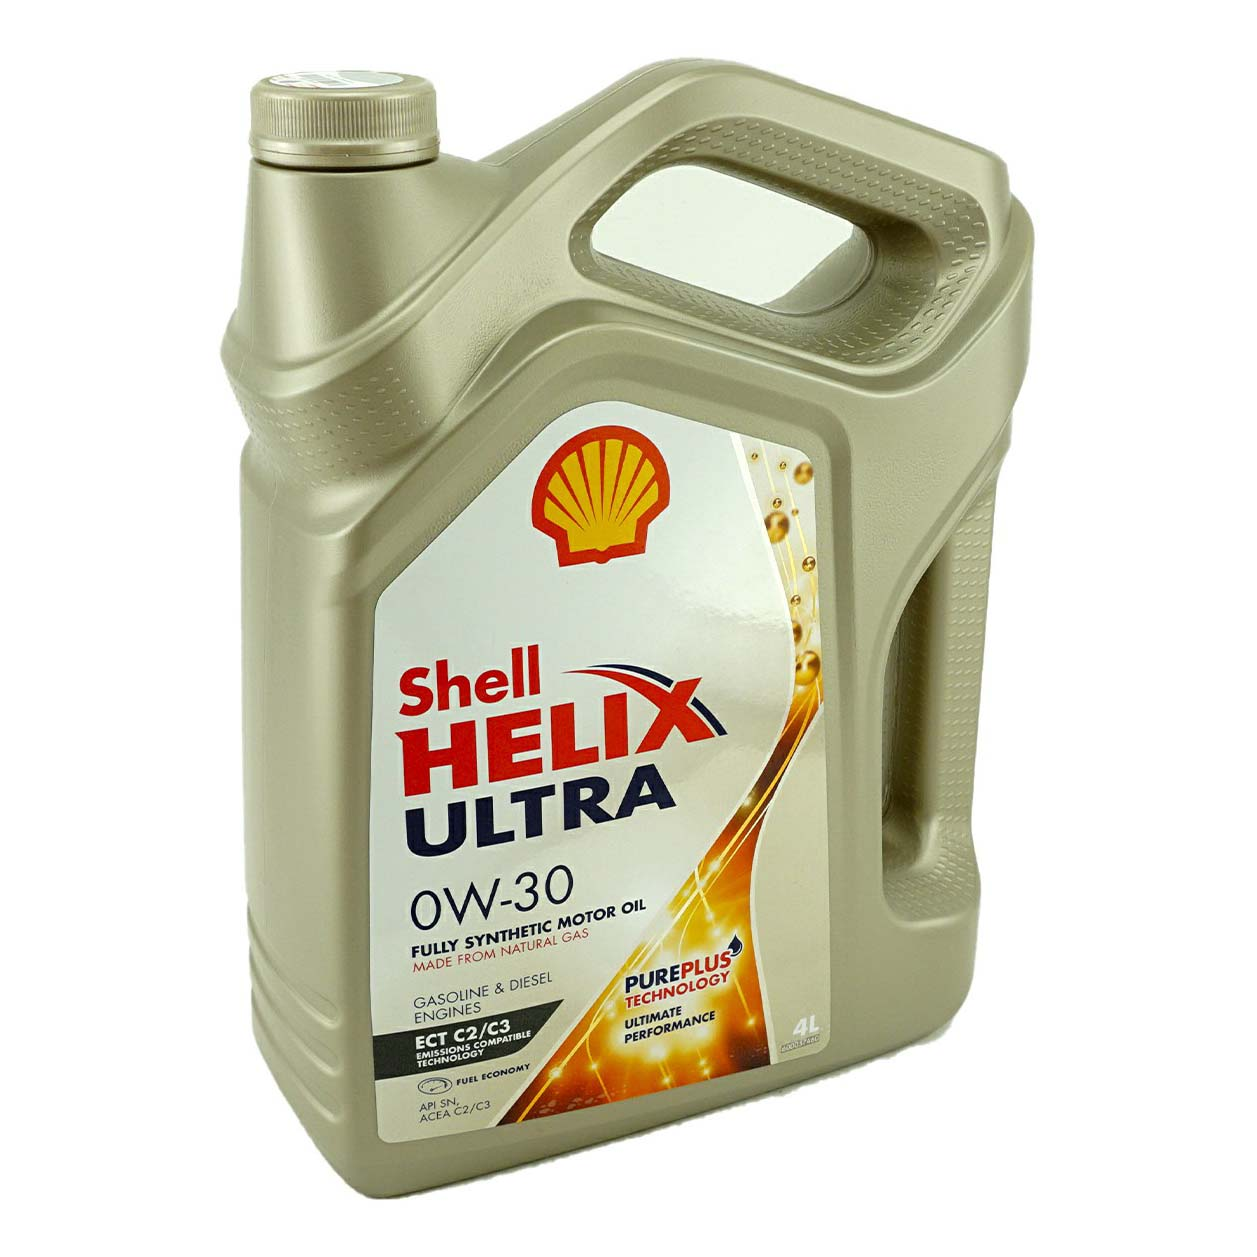 Моторное масло shell helix ultra 4л. Shell Ultra 5w30 ect c3. Масло моторное Helix Ultra ect c3 5w30 синт.4л Shell. Shell Helix Ultra 5w30 c3. Shell ect Ah 5w-30.